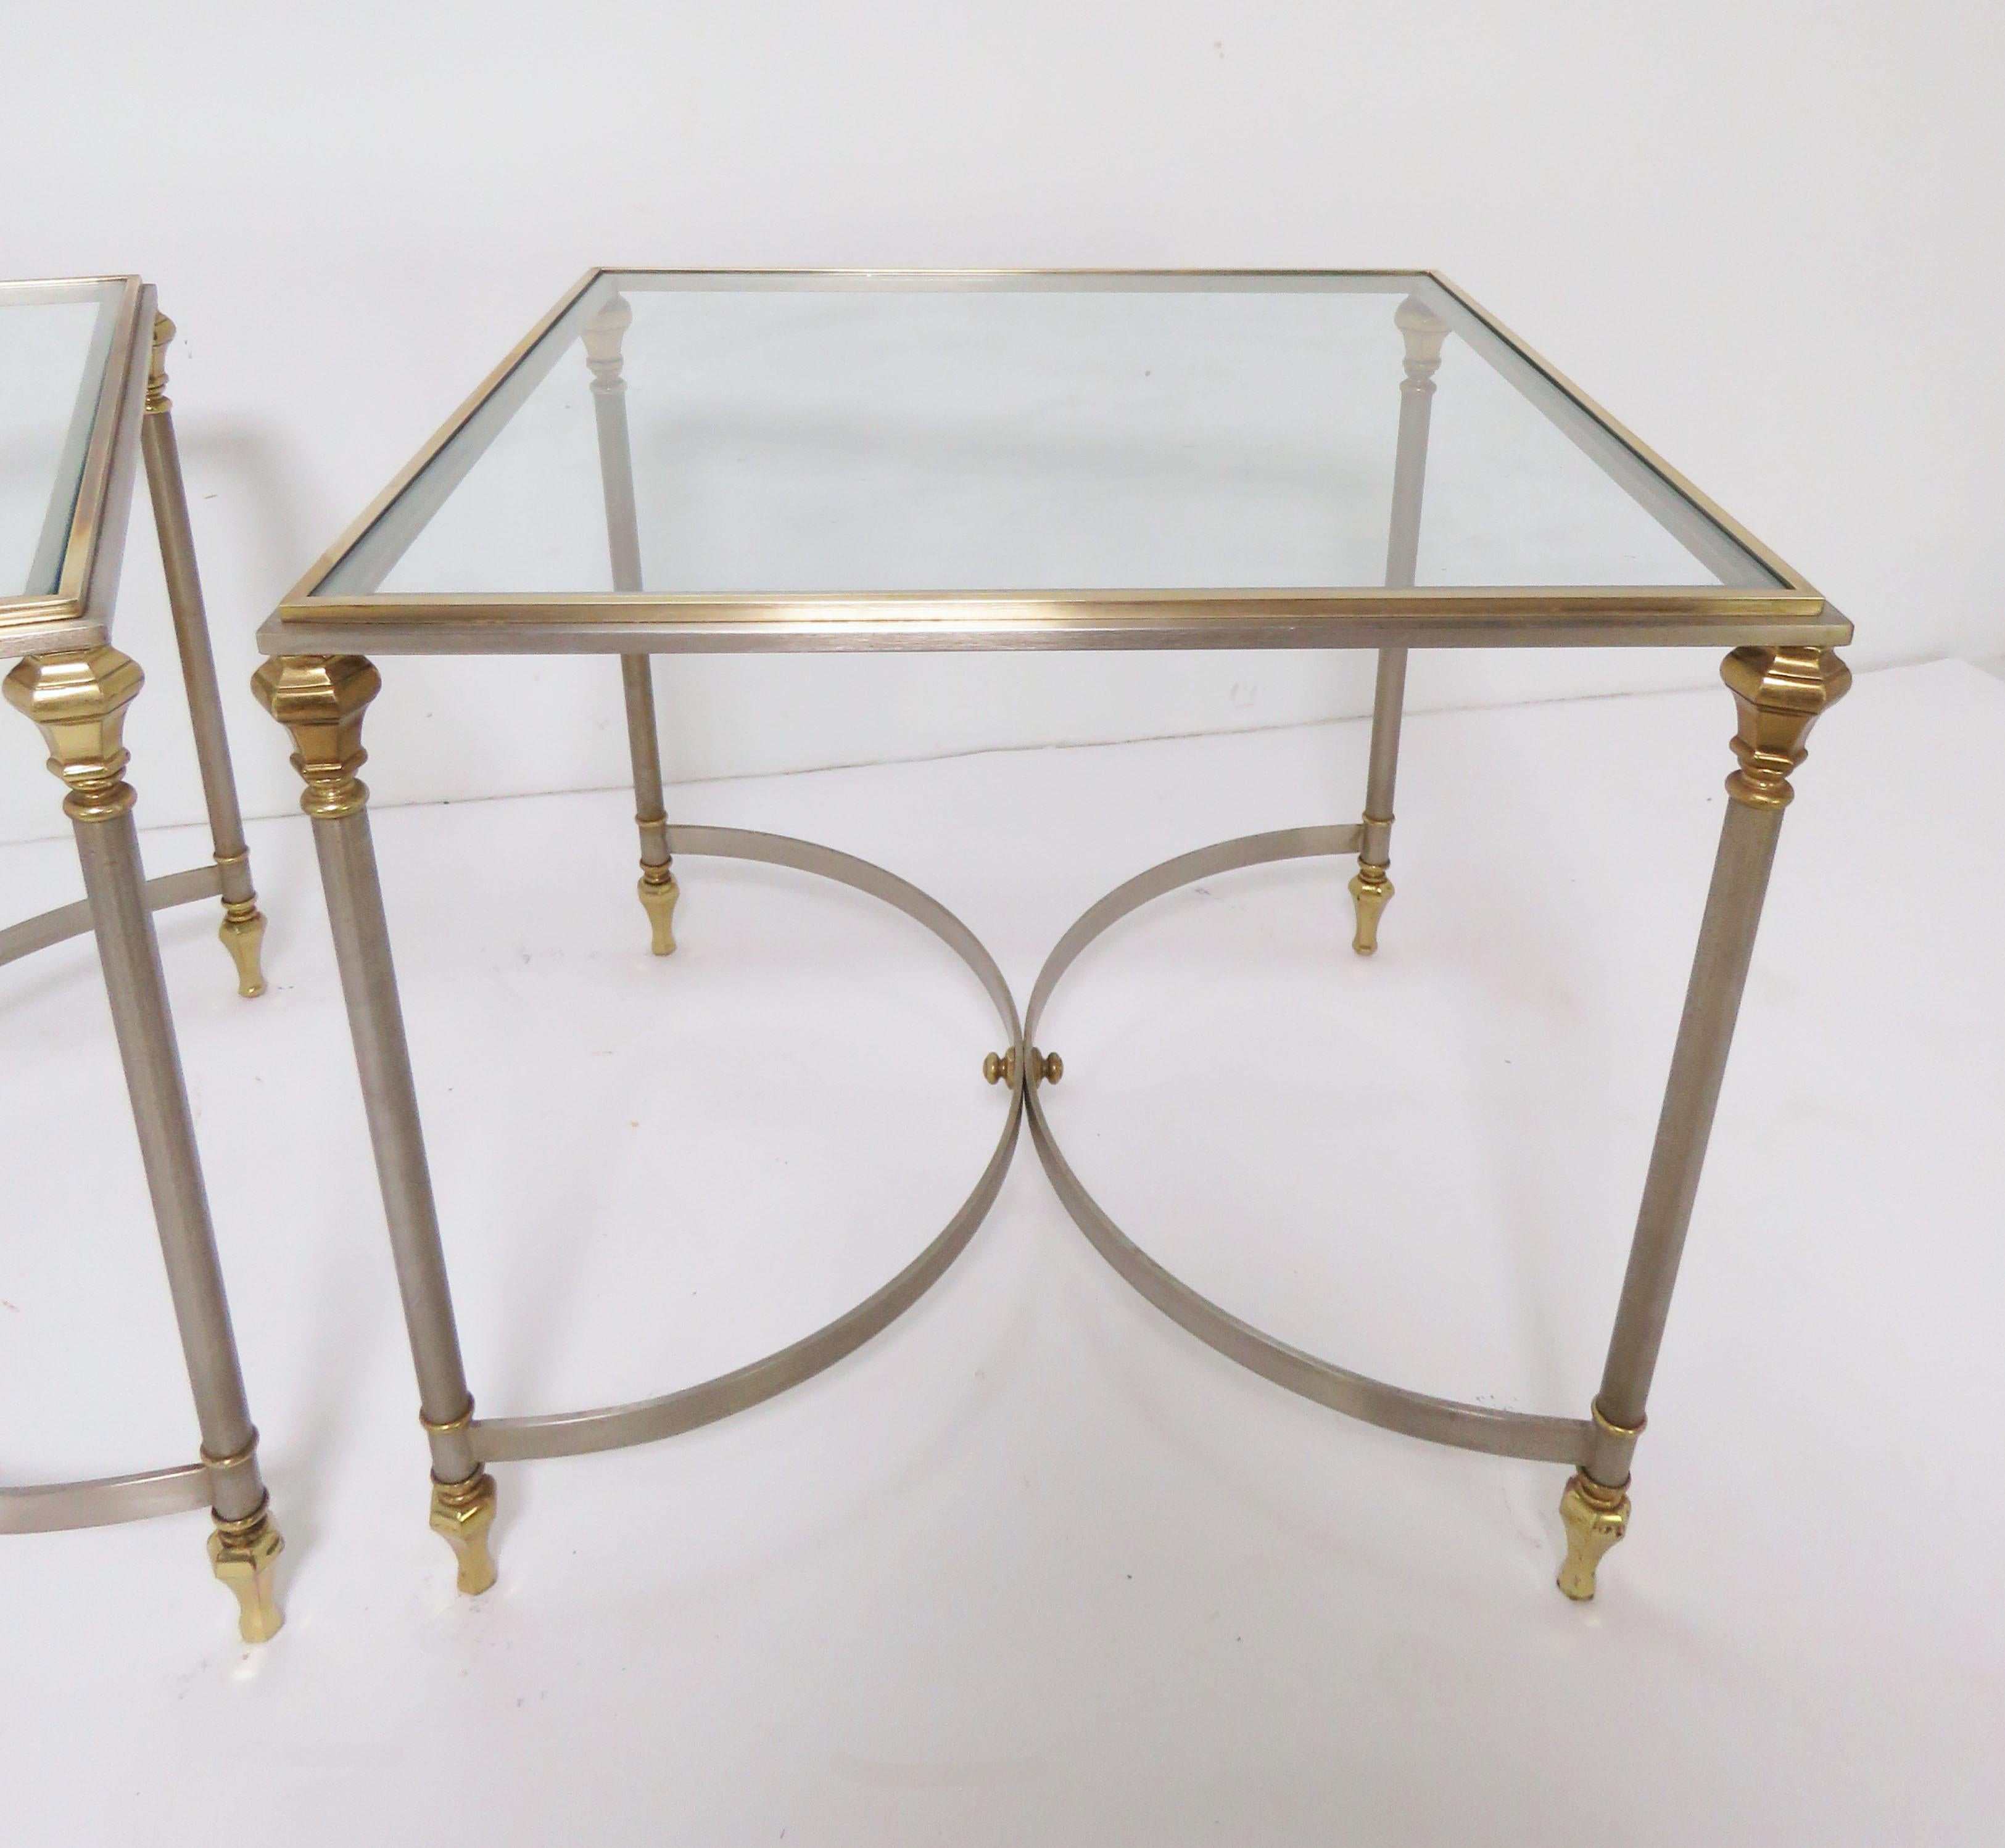 Pair of Maison Jansen Style Mixed Metal Side Tables, Made in Italy, circa 1960s (Hollywood Regency)